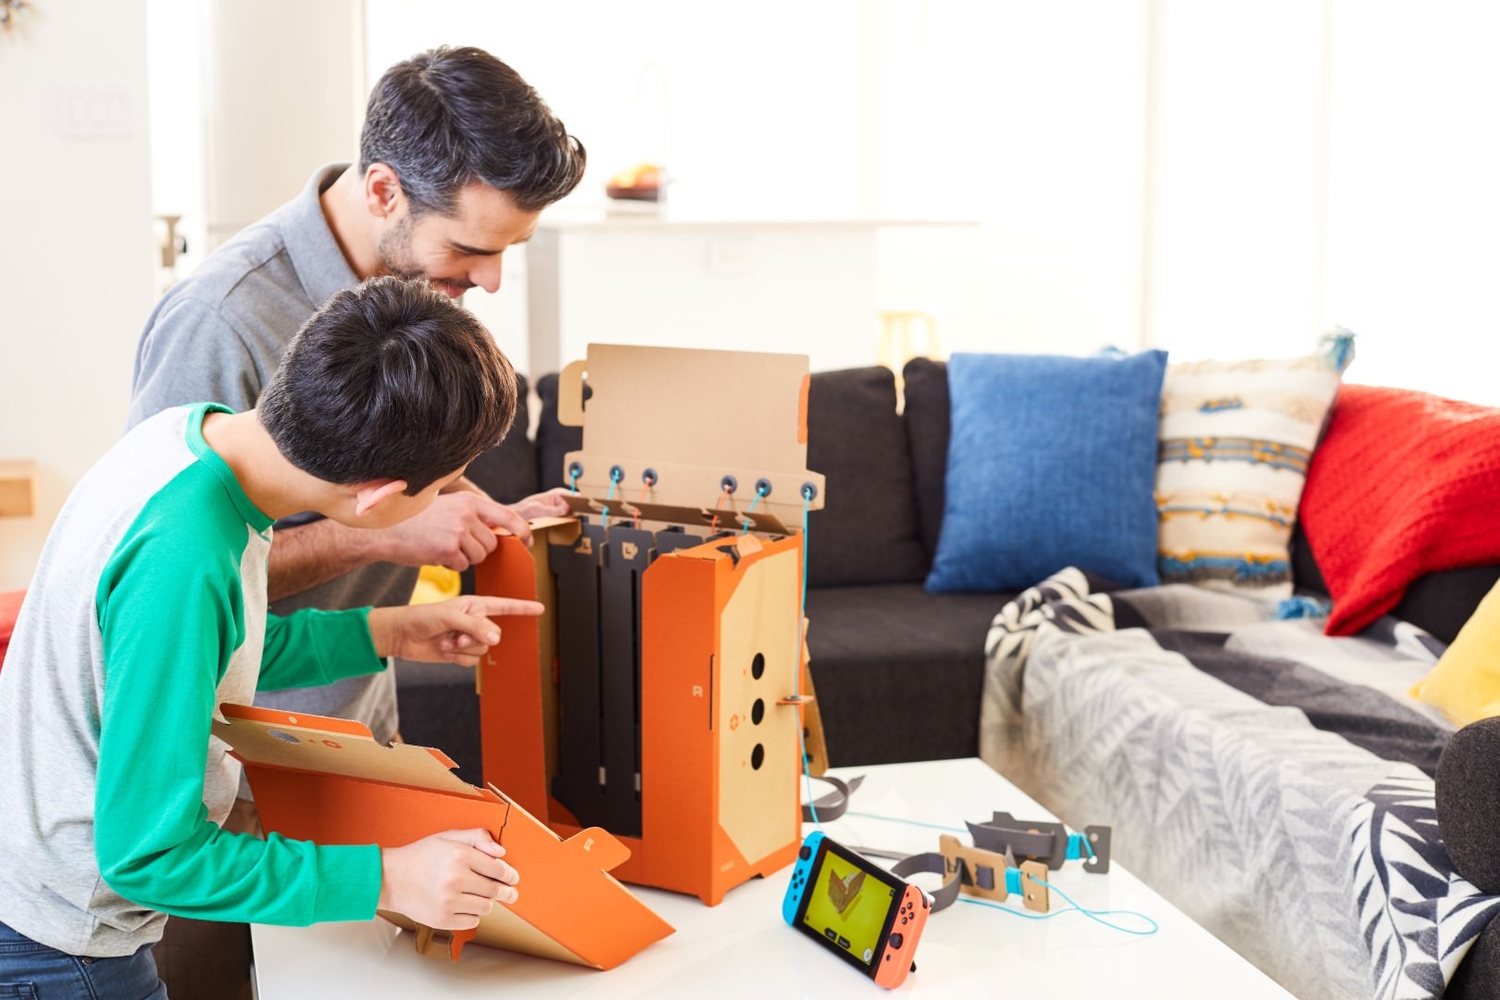 The coolest Nintendo Labo creations we could find